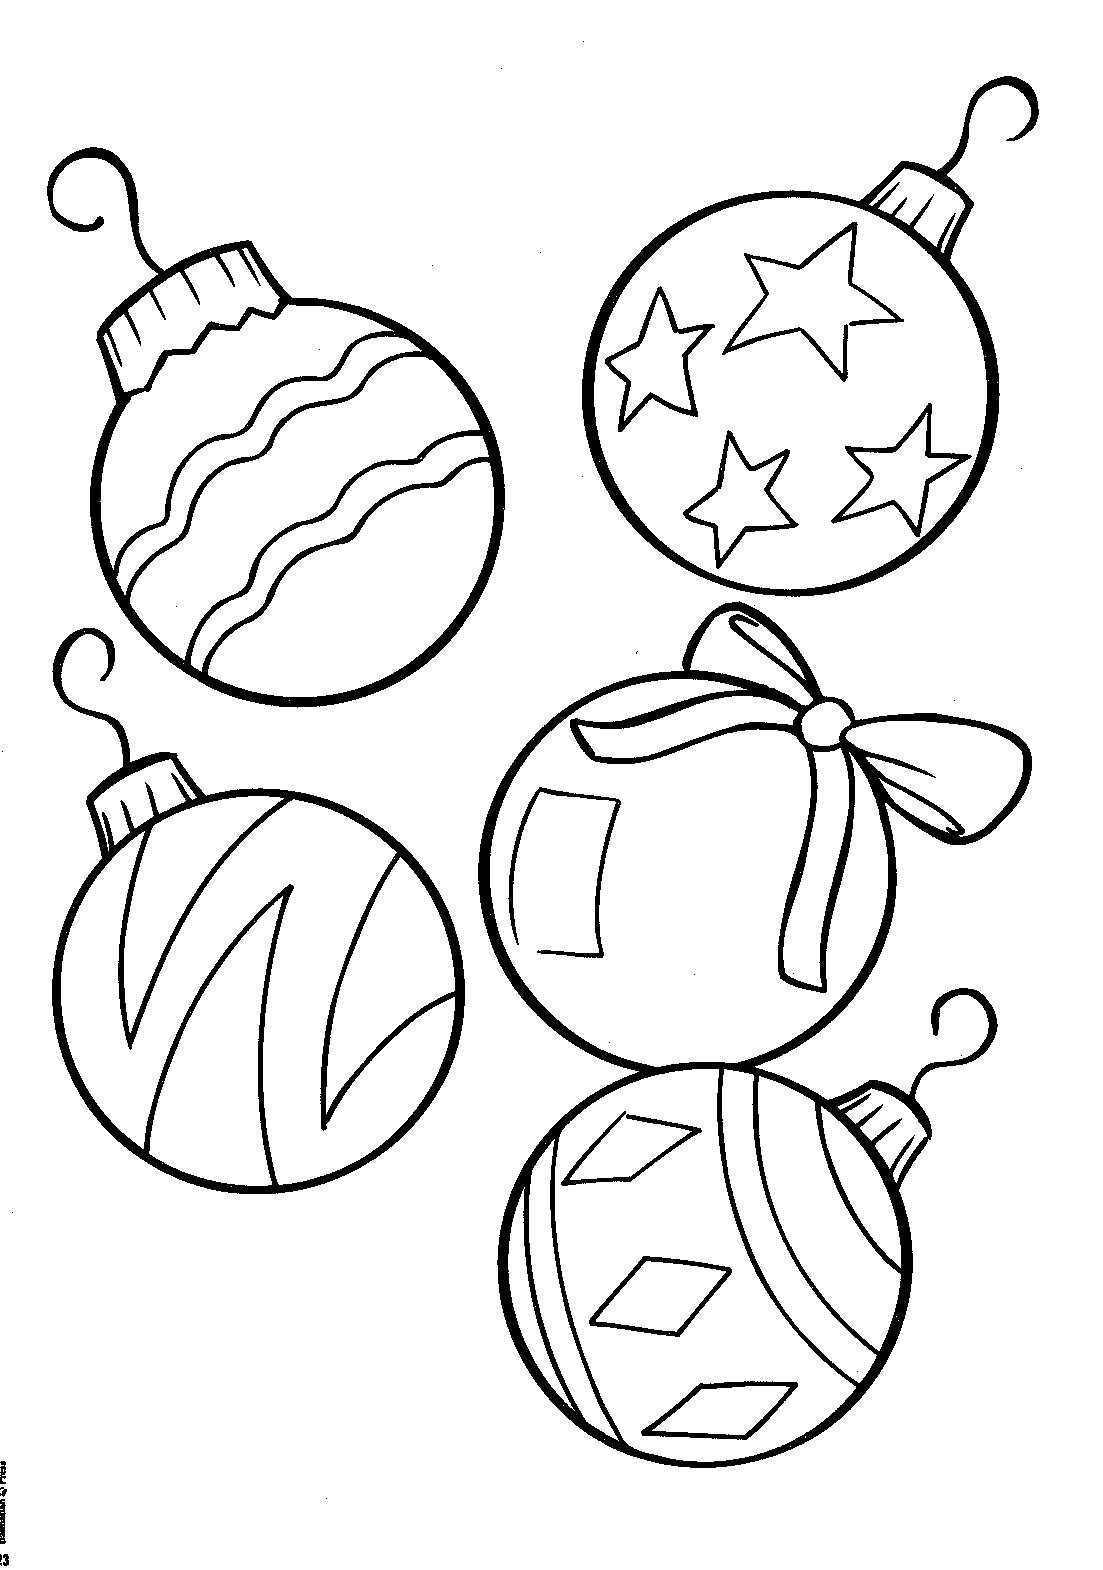 Christmas Coloring Pages For Children
 Coloring Pages Christmas Coloring Pages for Kids